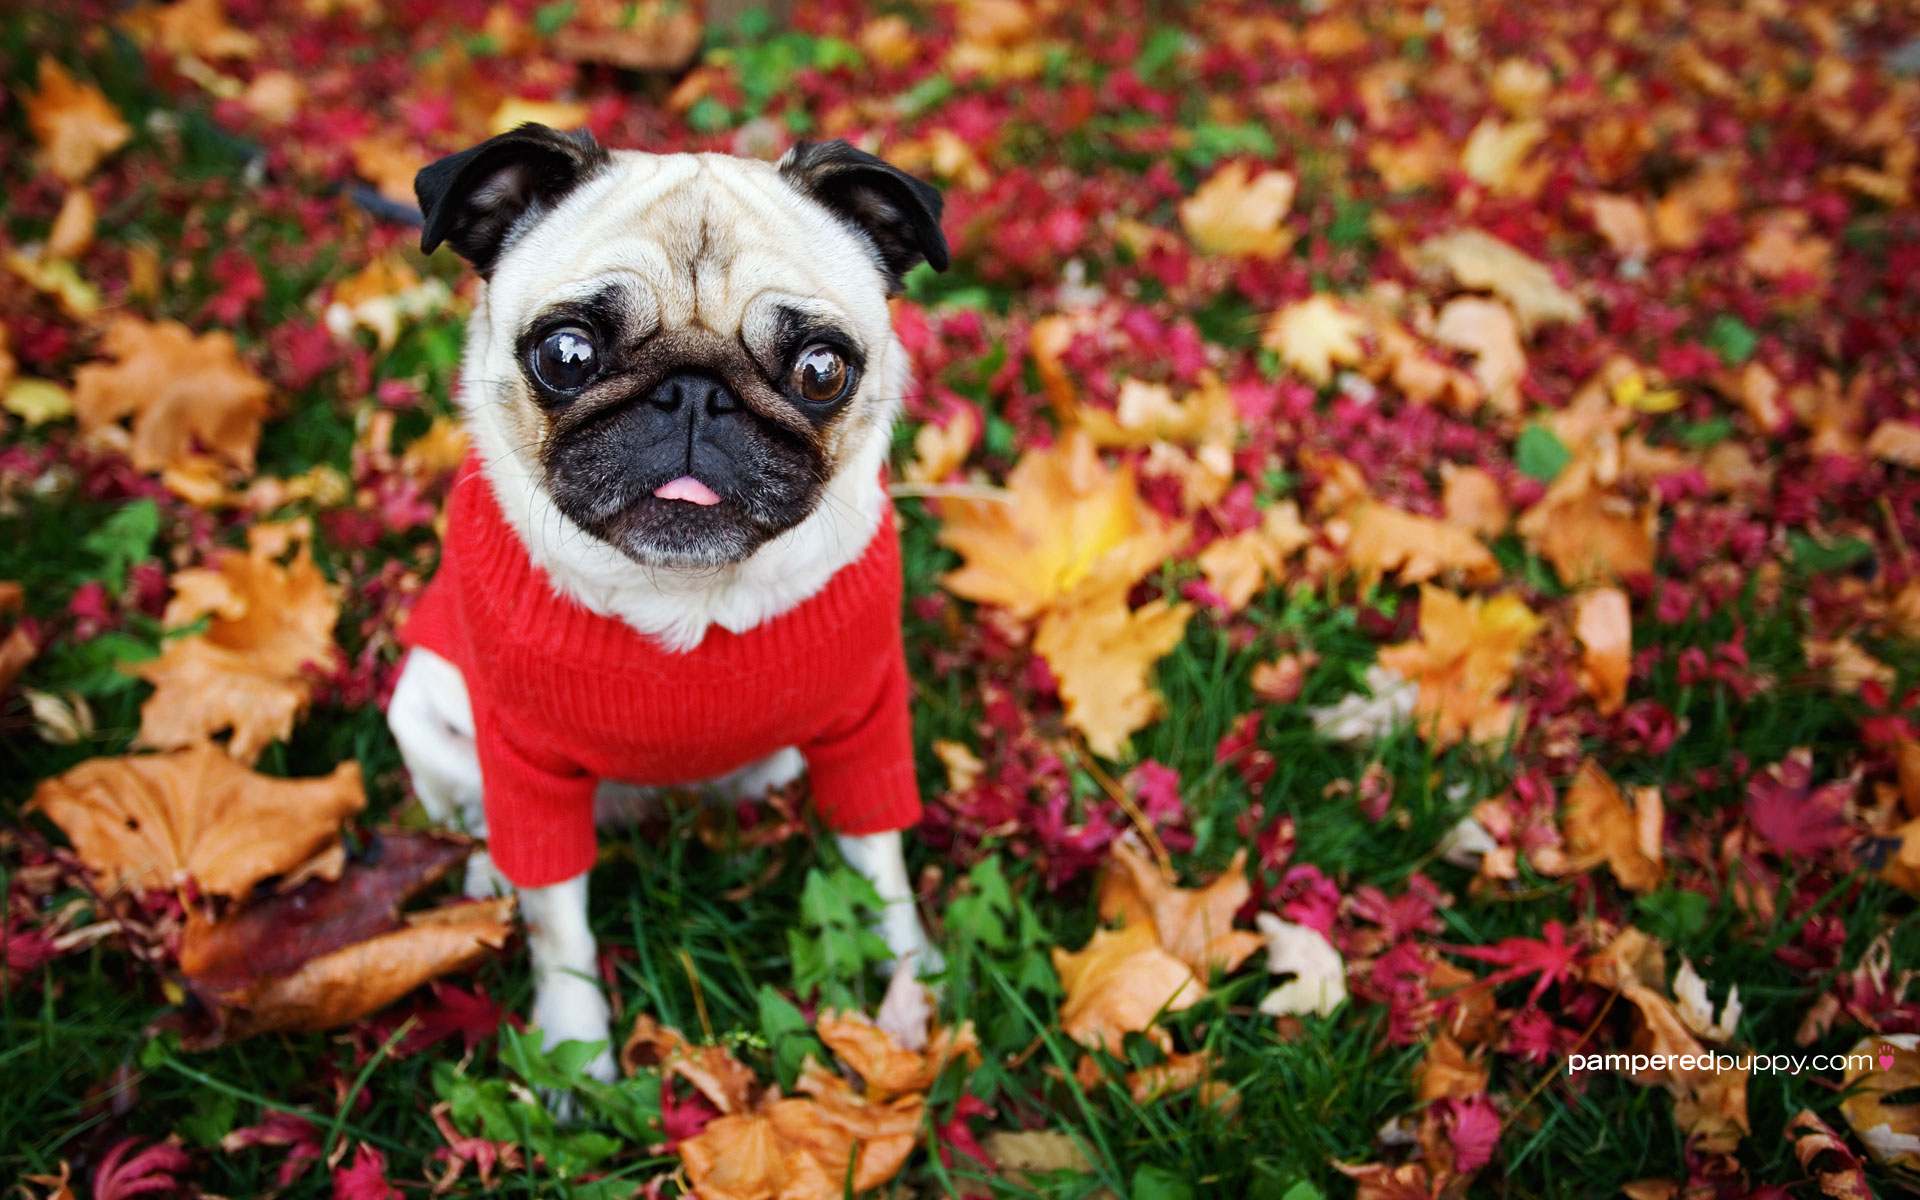 Responses To Funny Pug In Fall Leaves